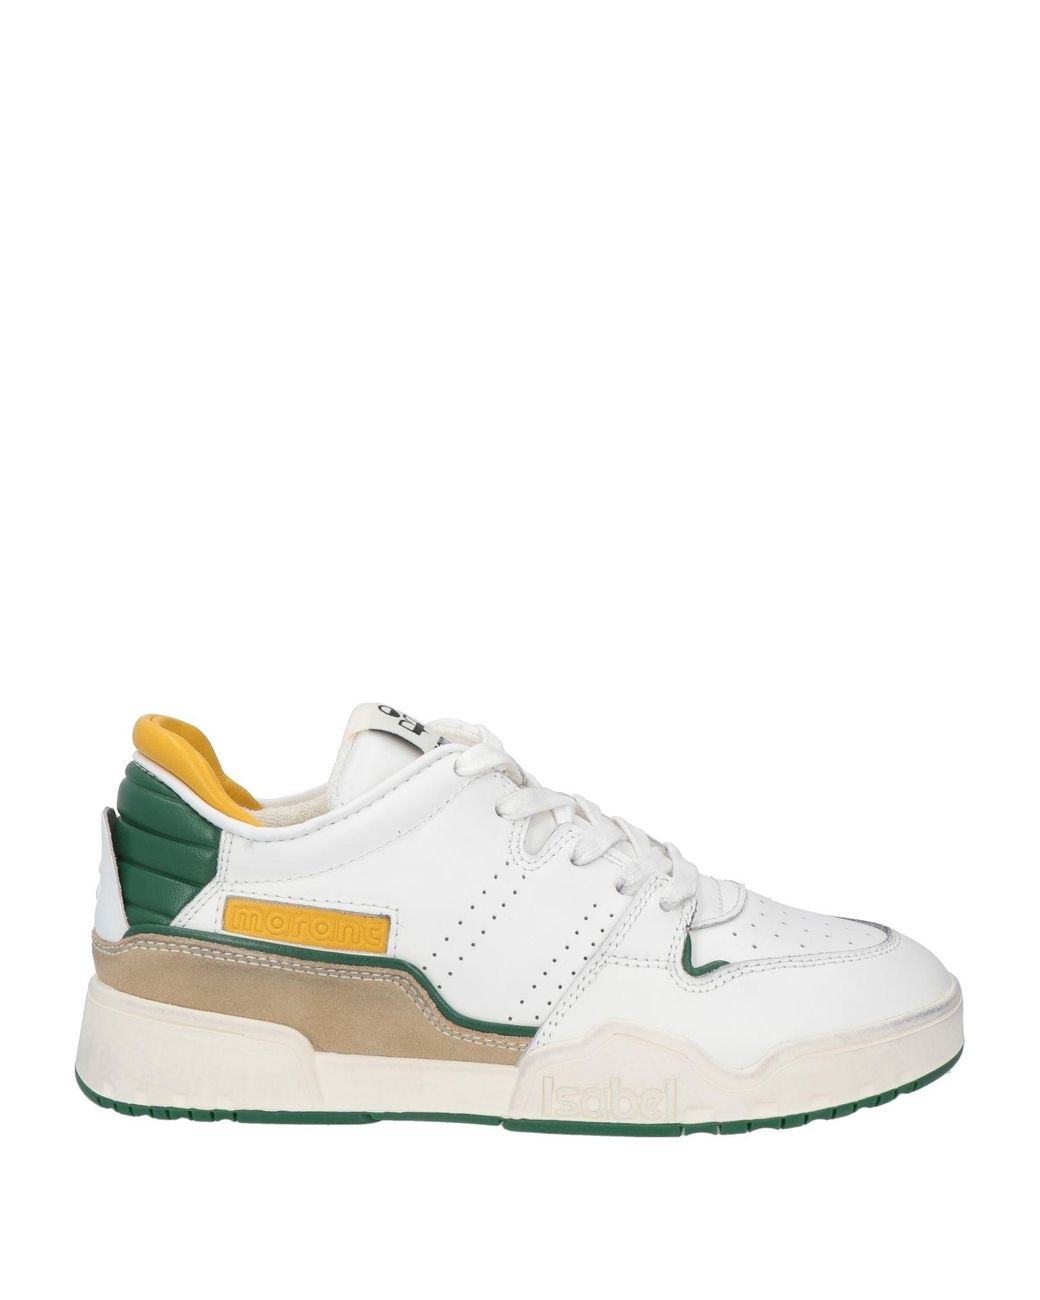 Isabel Marant Sneakers in White | Lyst